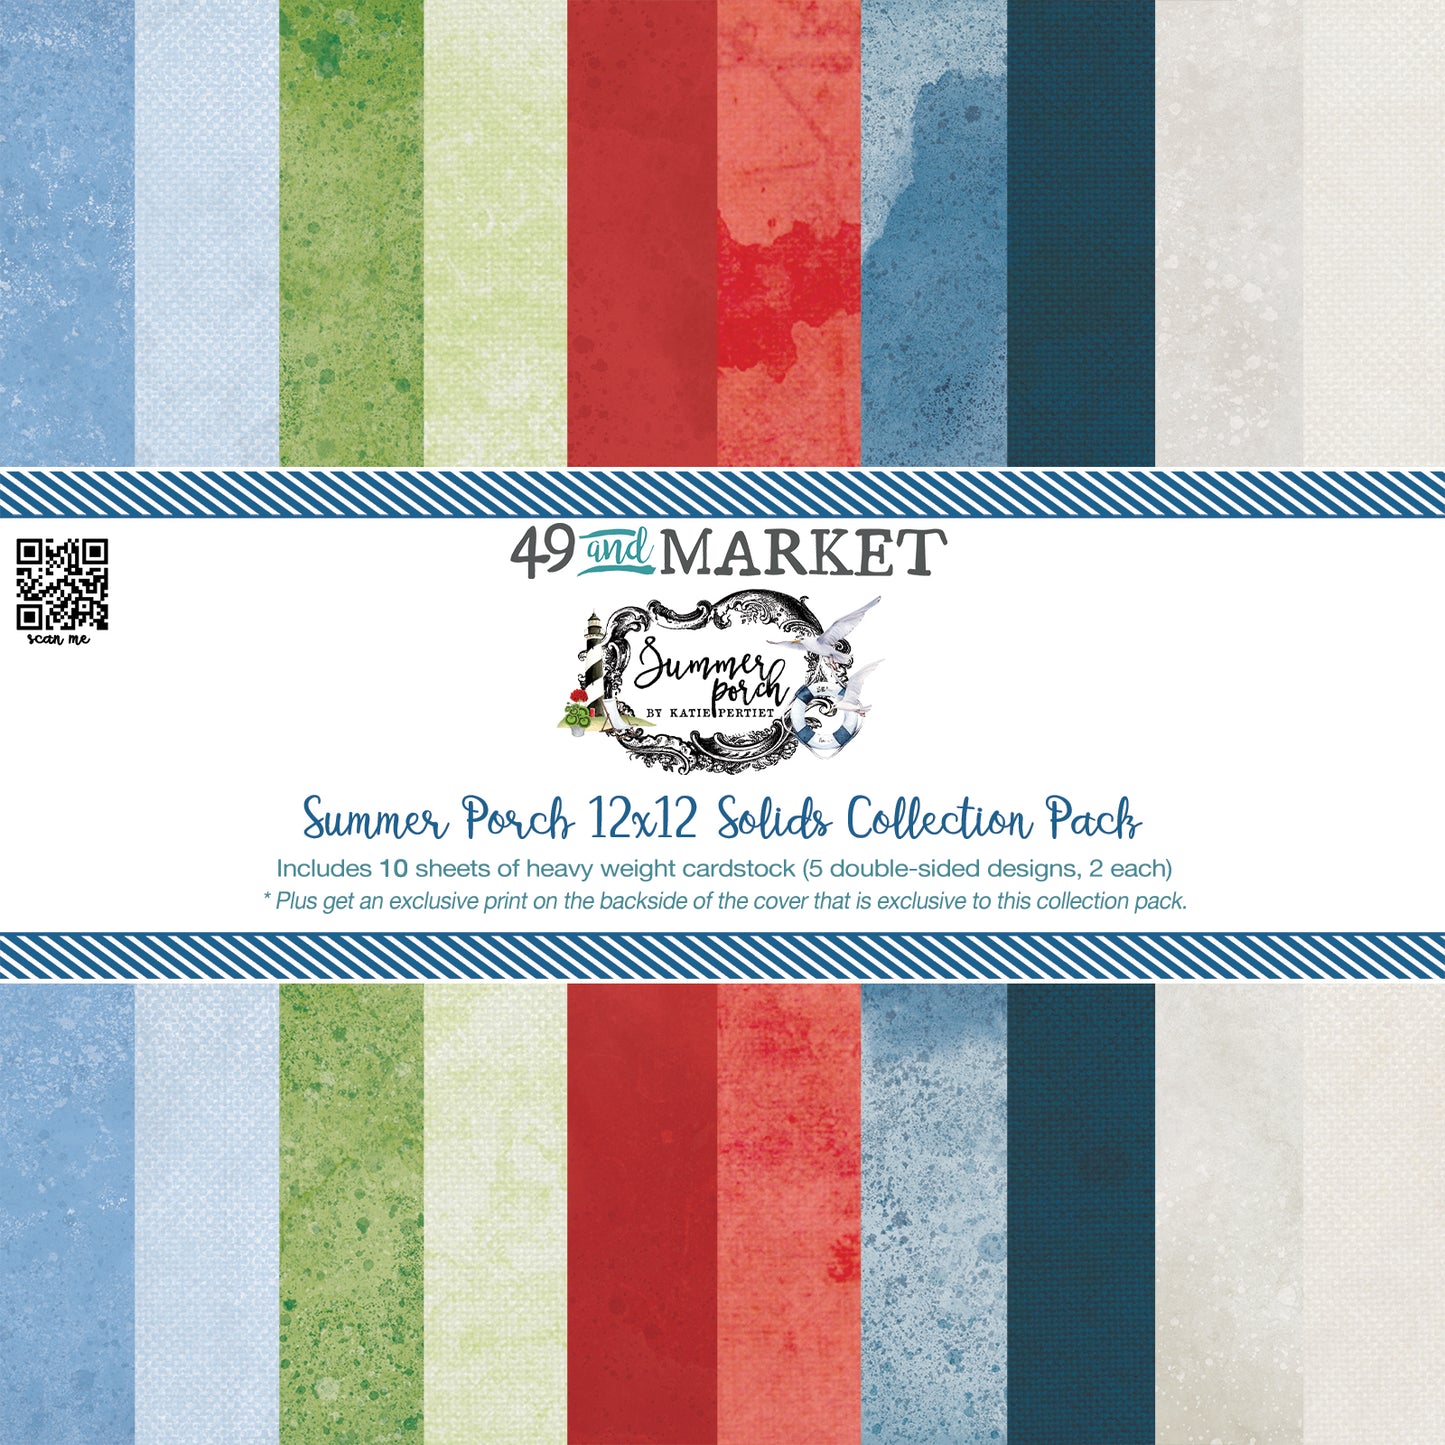 BUY IT ALL: 49 & Market Summer Porch Collection